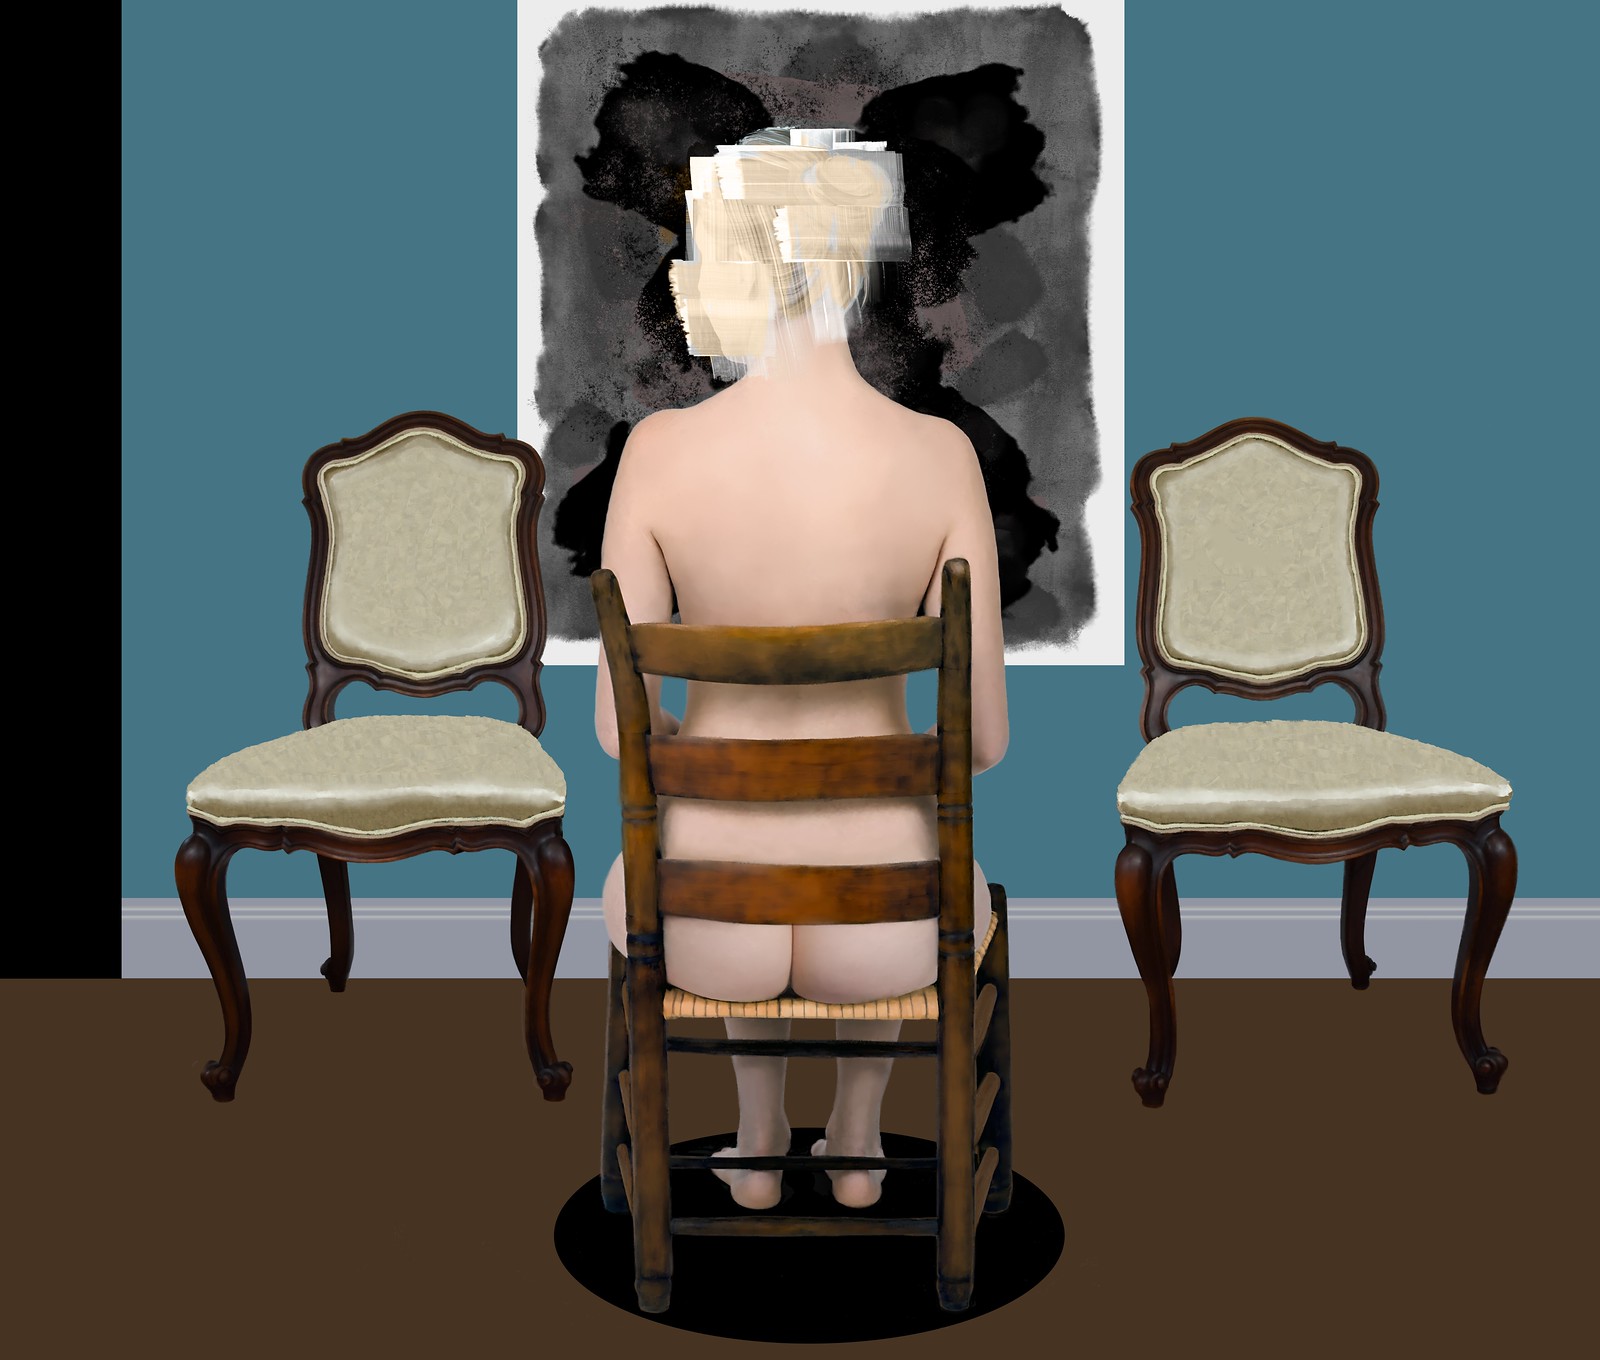 Woman Between Two Chairs, 2017